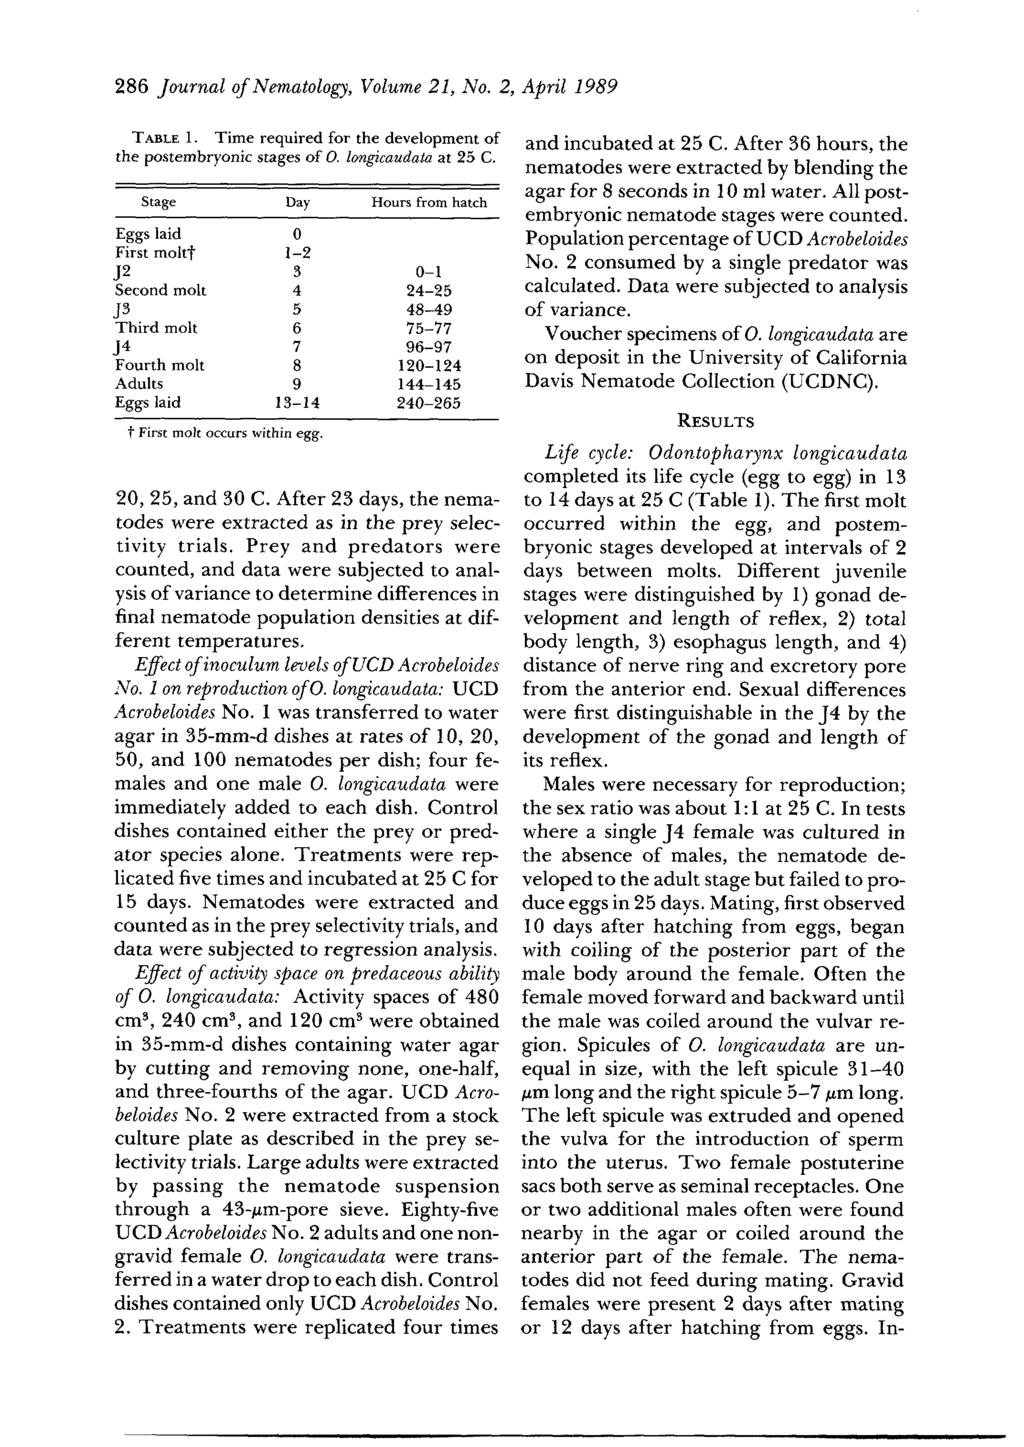 286 Journal of Nematology, Volume 21, No. 2, April 1989 TABLE 1. Time required for the development of the postembryonic stages of O. longicaudata at 25 C.